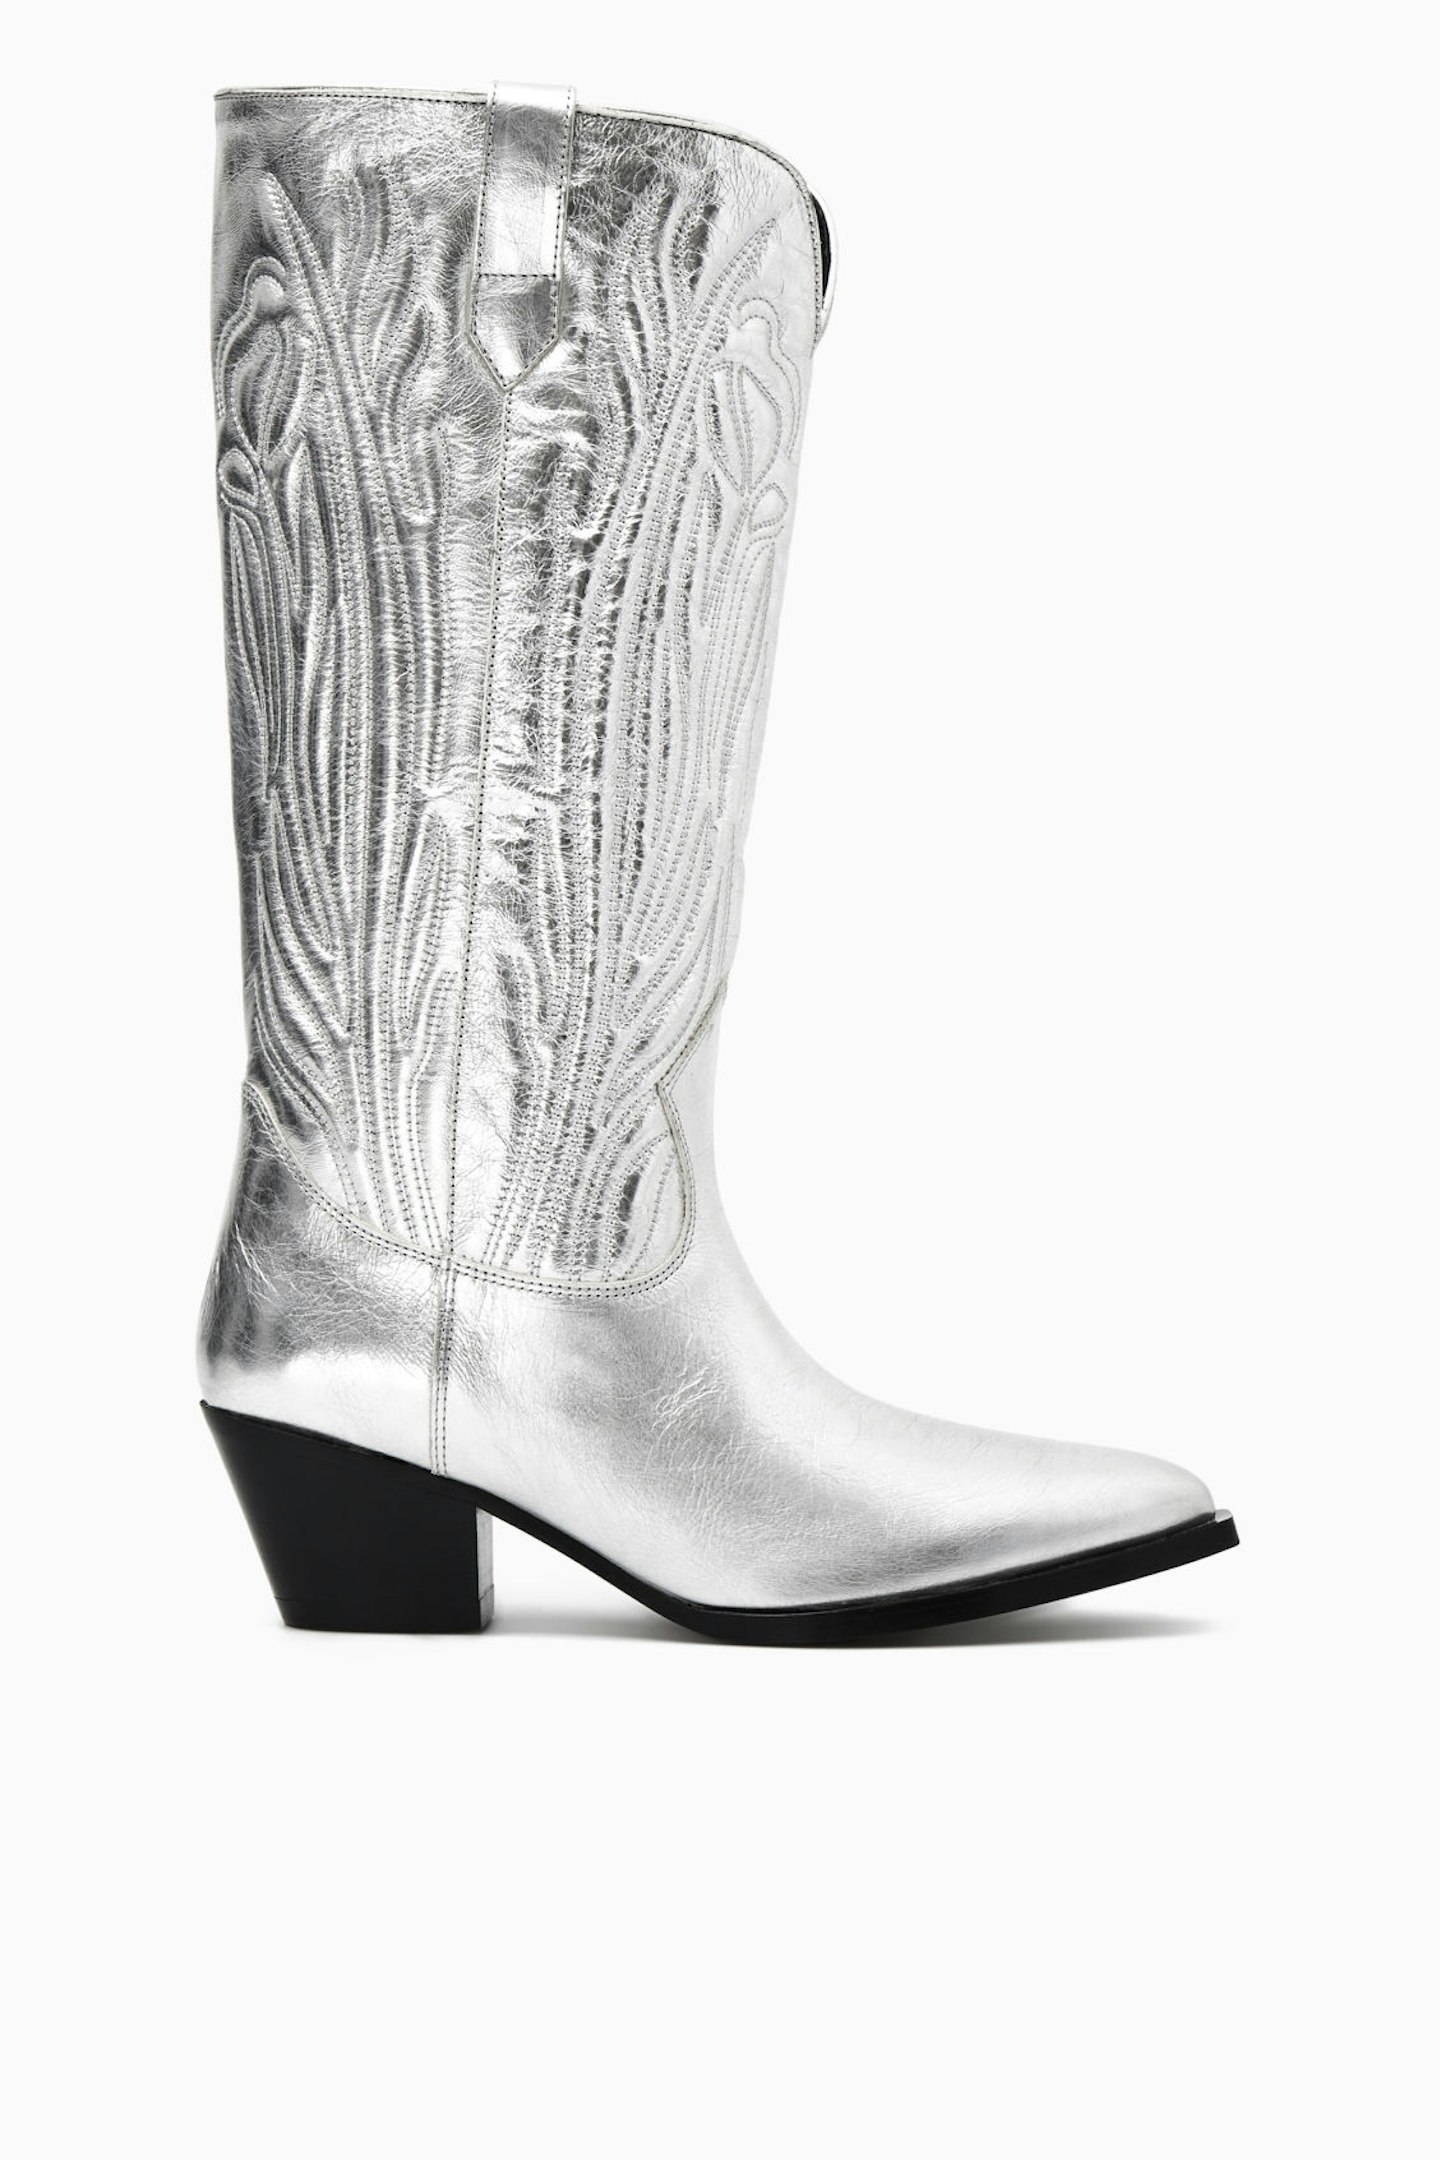 Best cowboy boots 2021: From Banggood to Gucci